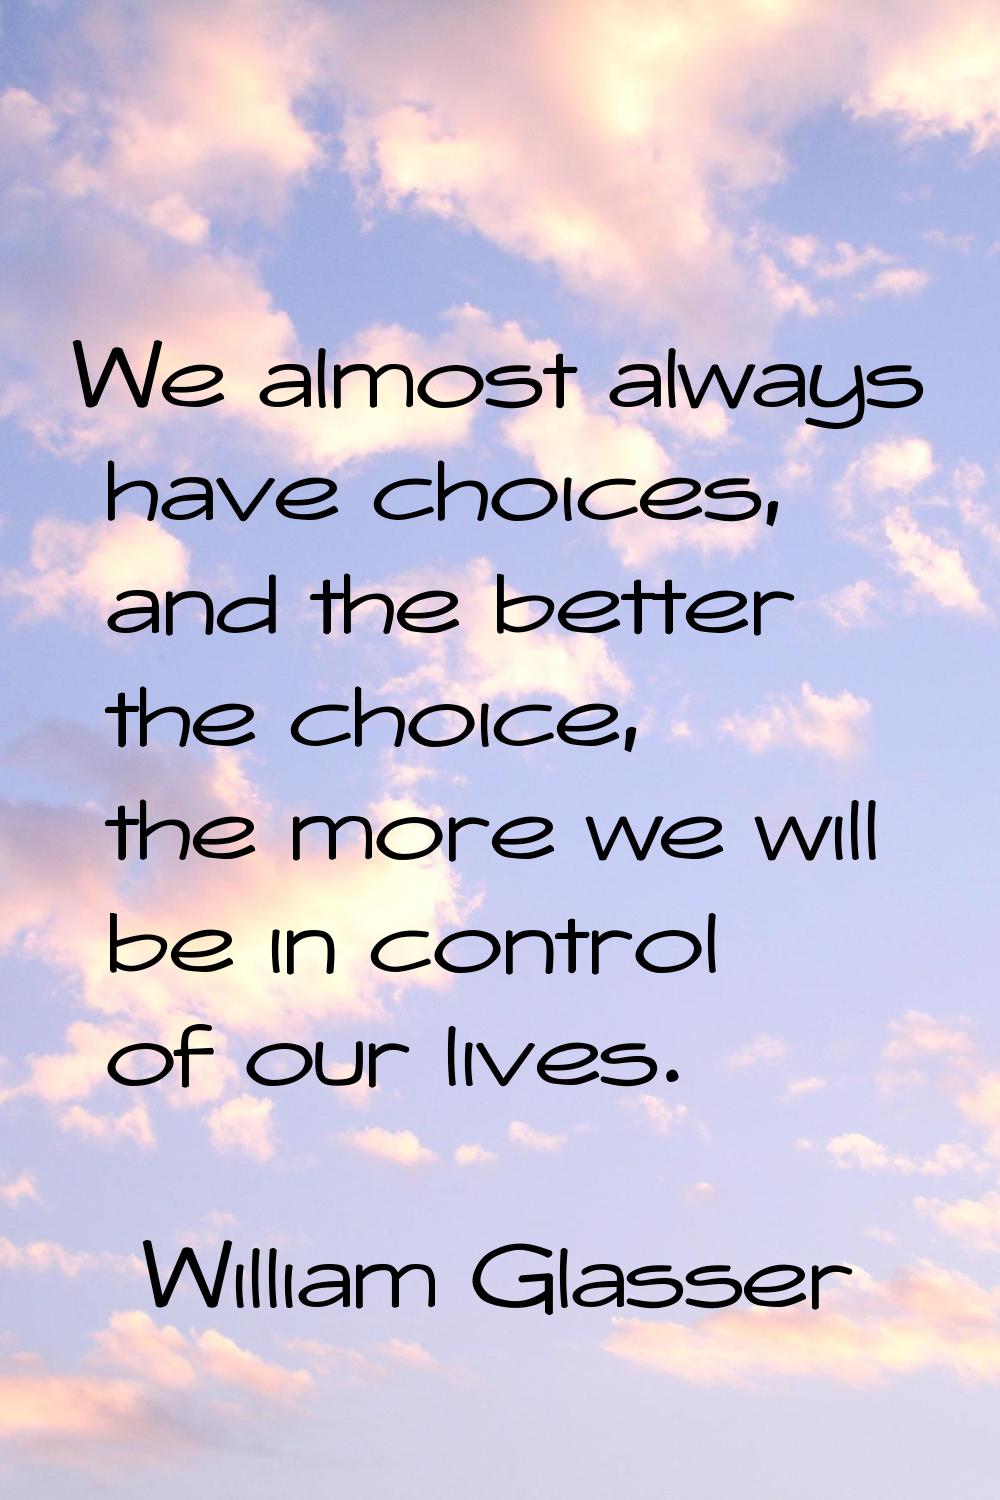 We almost always have choices, and the better the choice, the more we will be in control of our liv